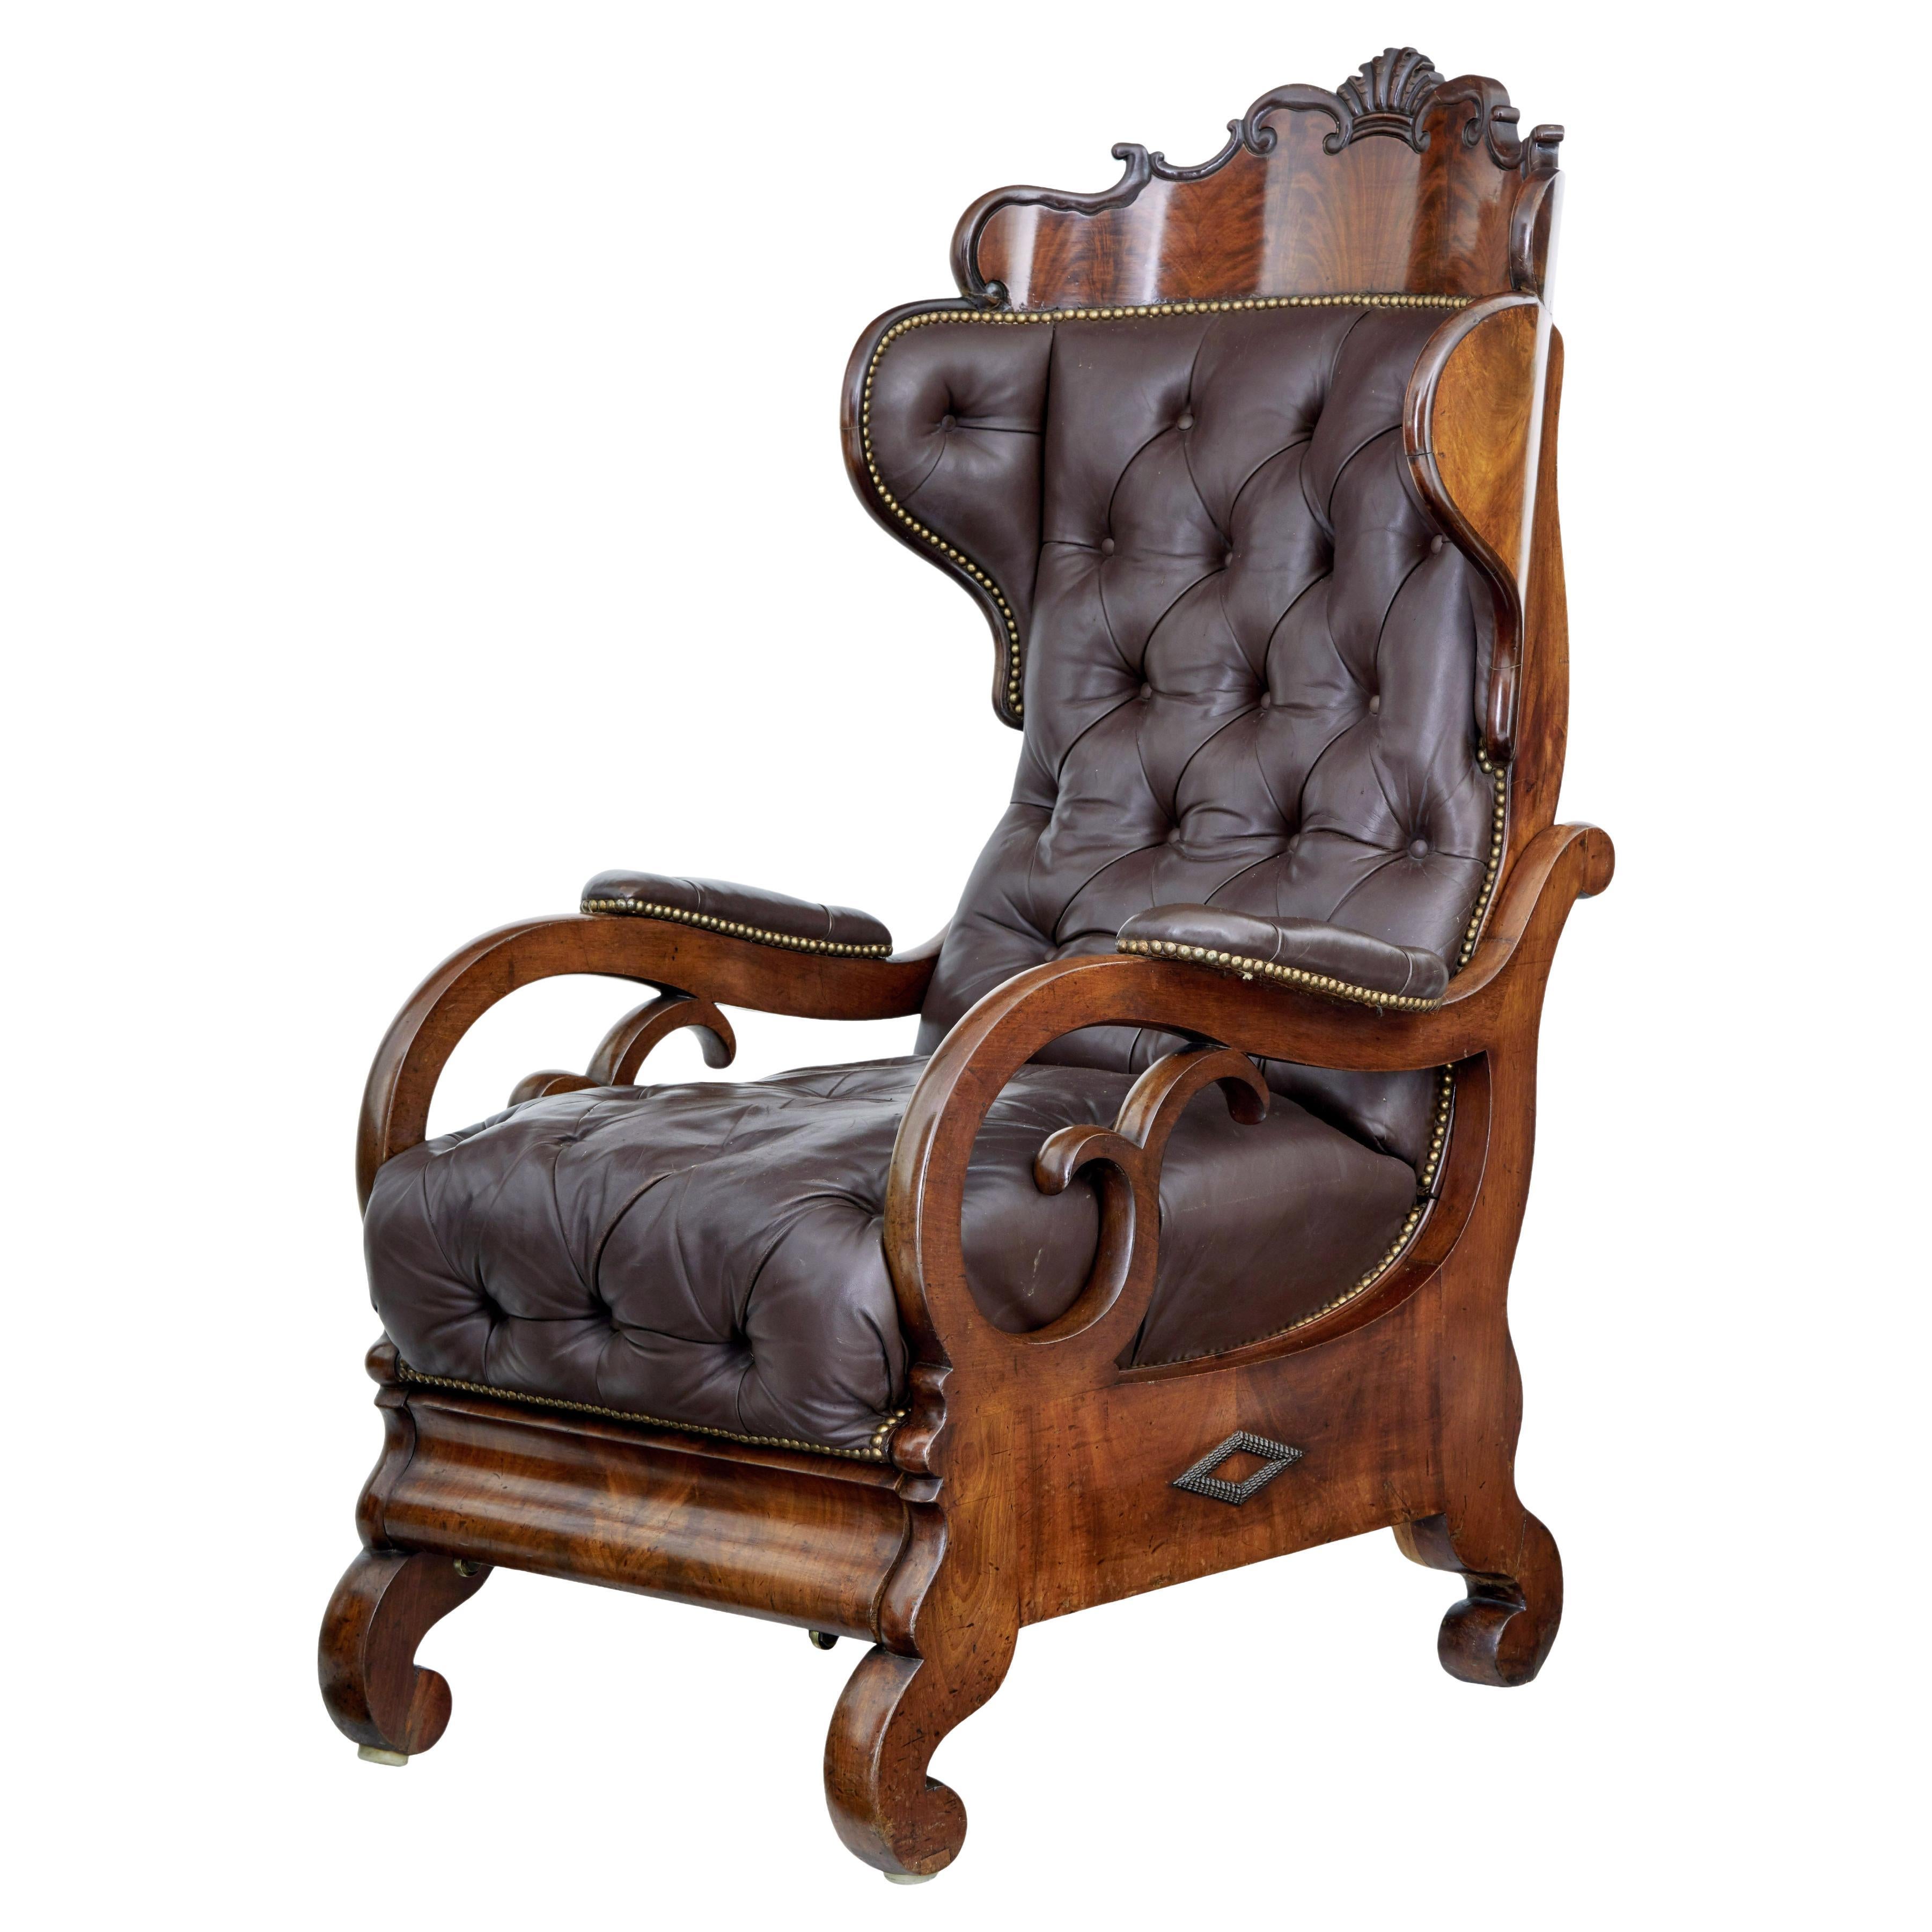 Mid 19th century French mahogany and leather reclining chair For Sale